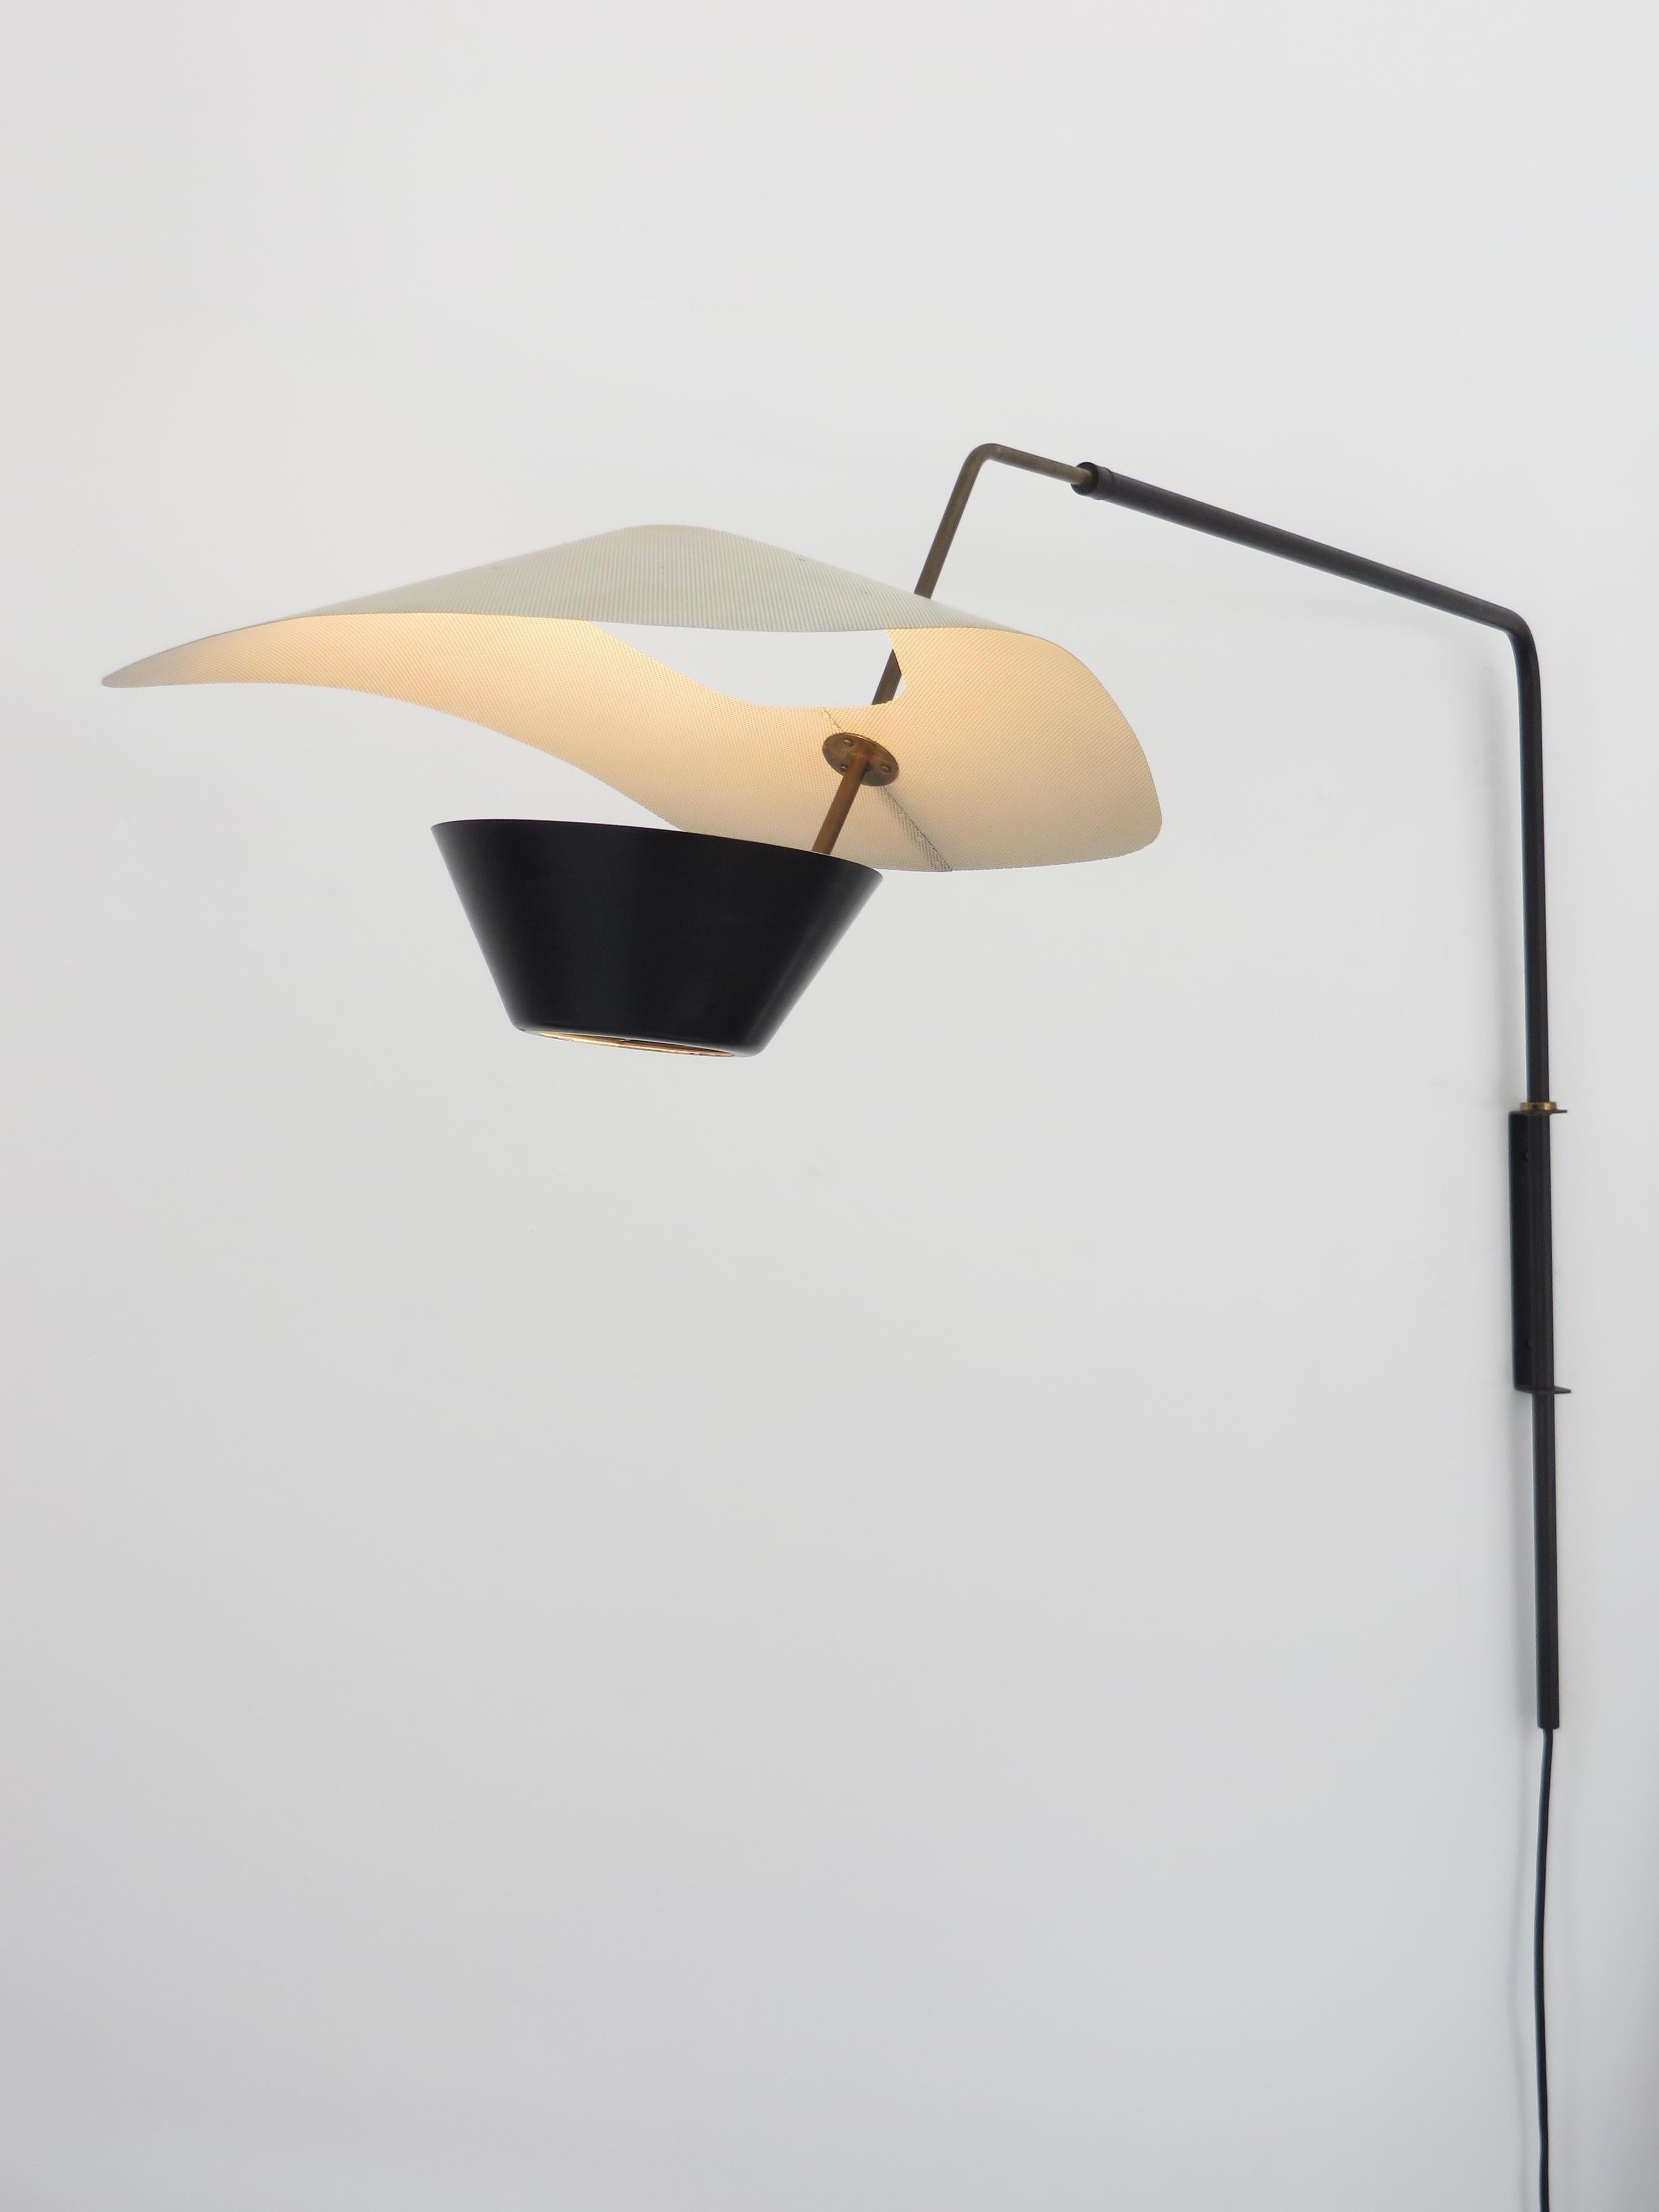 Kite Cerf Volant Applique Wall Light by Pierre Guariche Editioned by Disderot 7